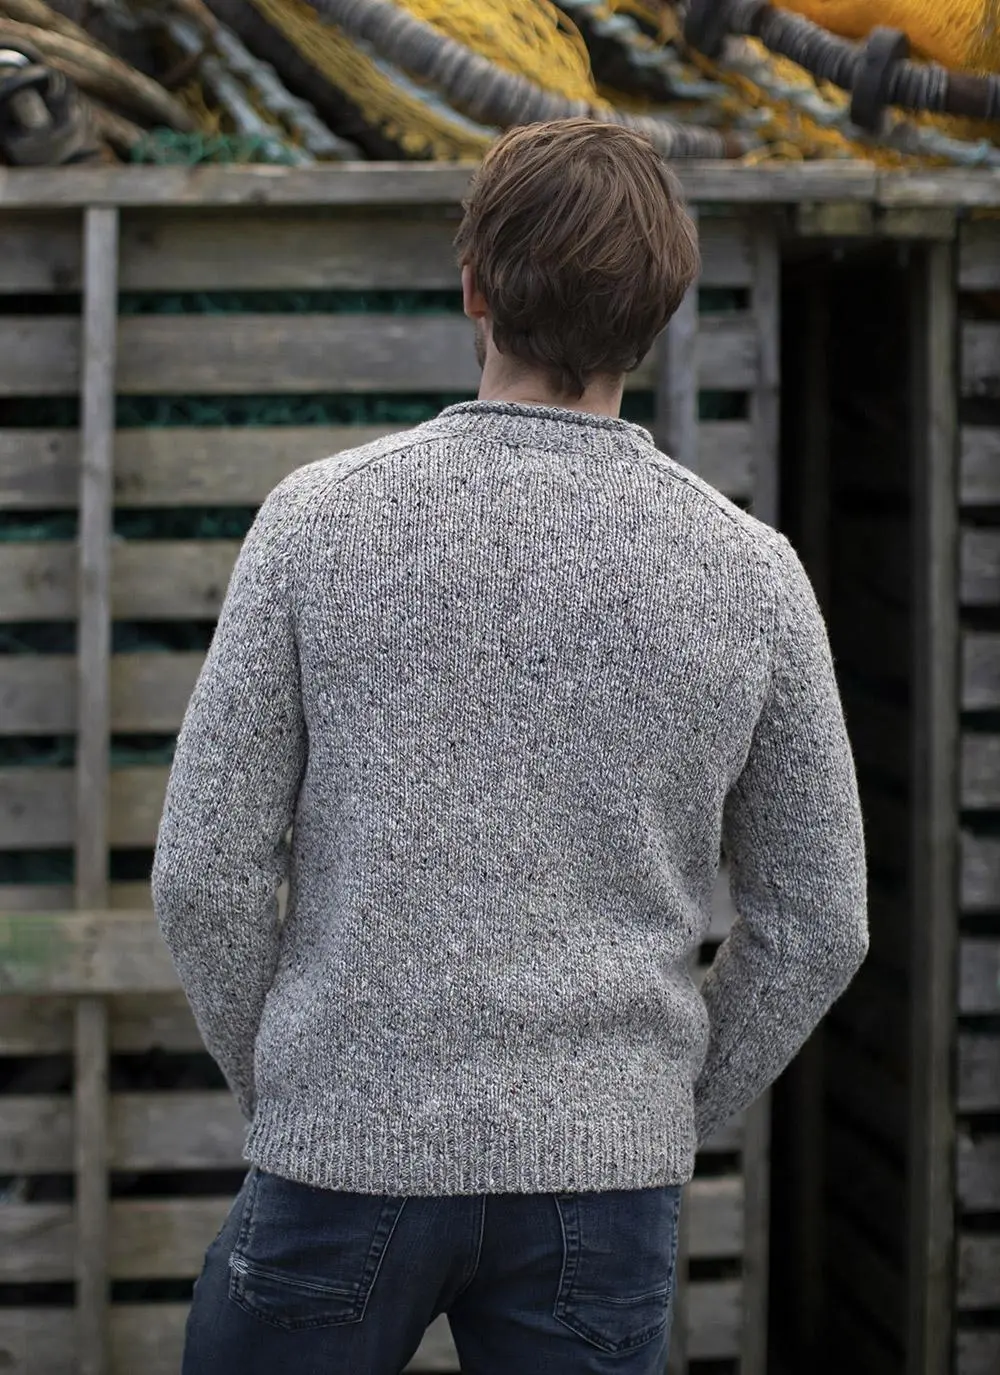 back angle shot of man standing against grey wooden fence wearing grey sweater